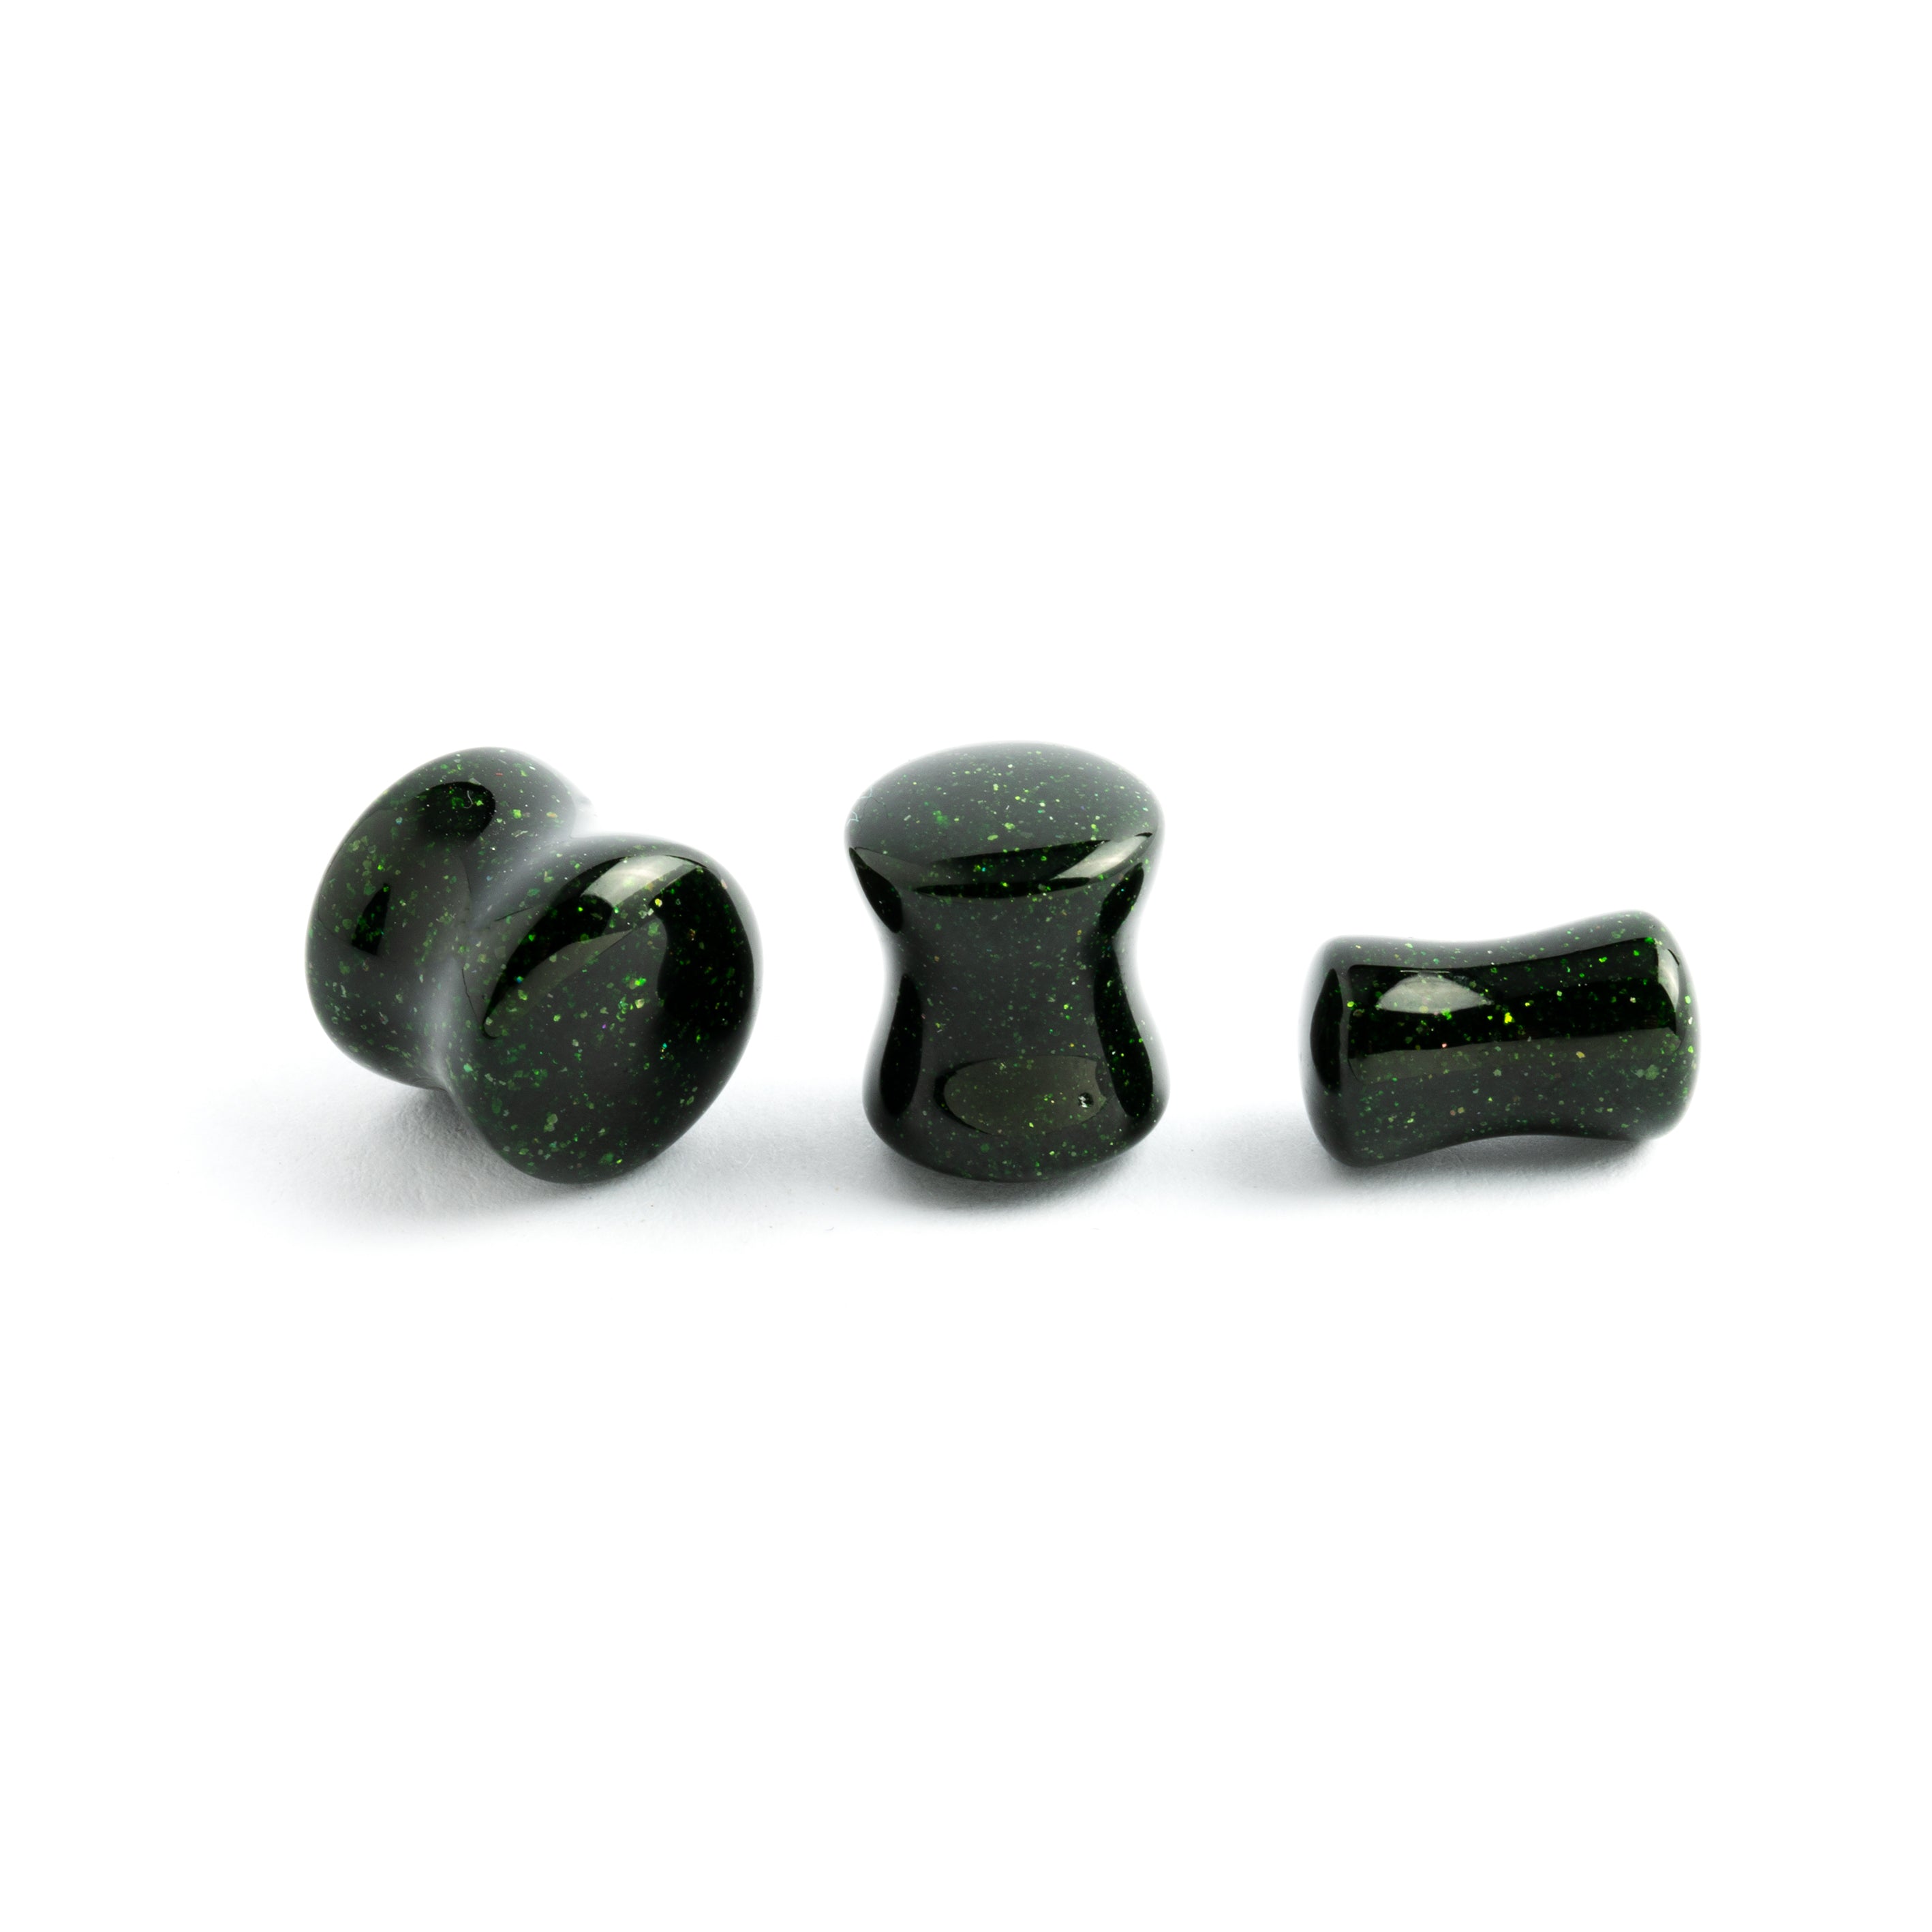 several sizes of Dragon Sandstone ear plugs 